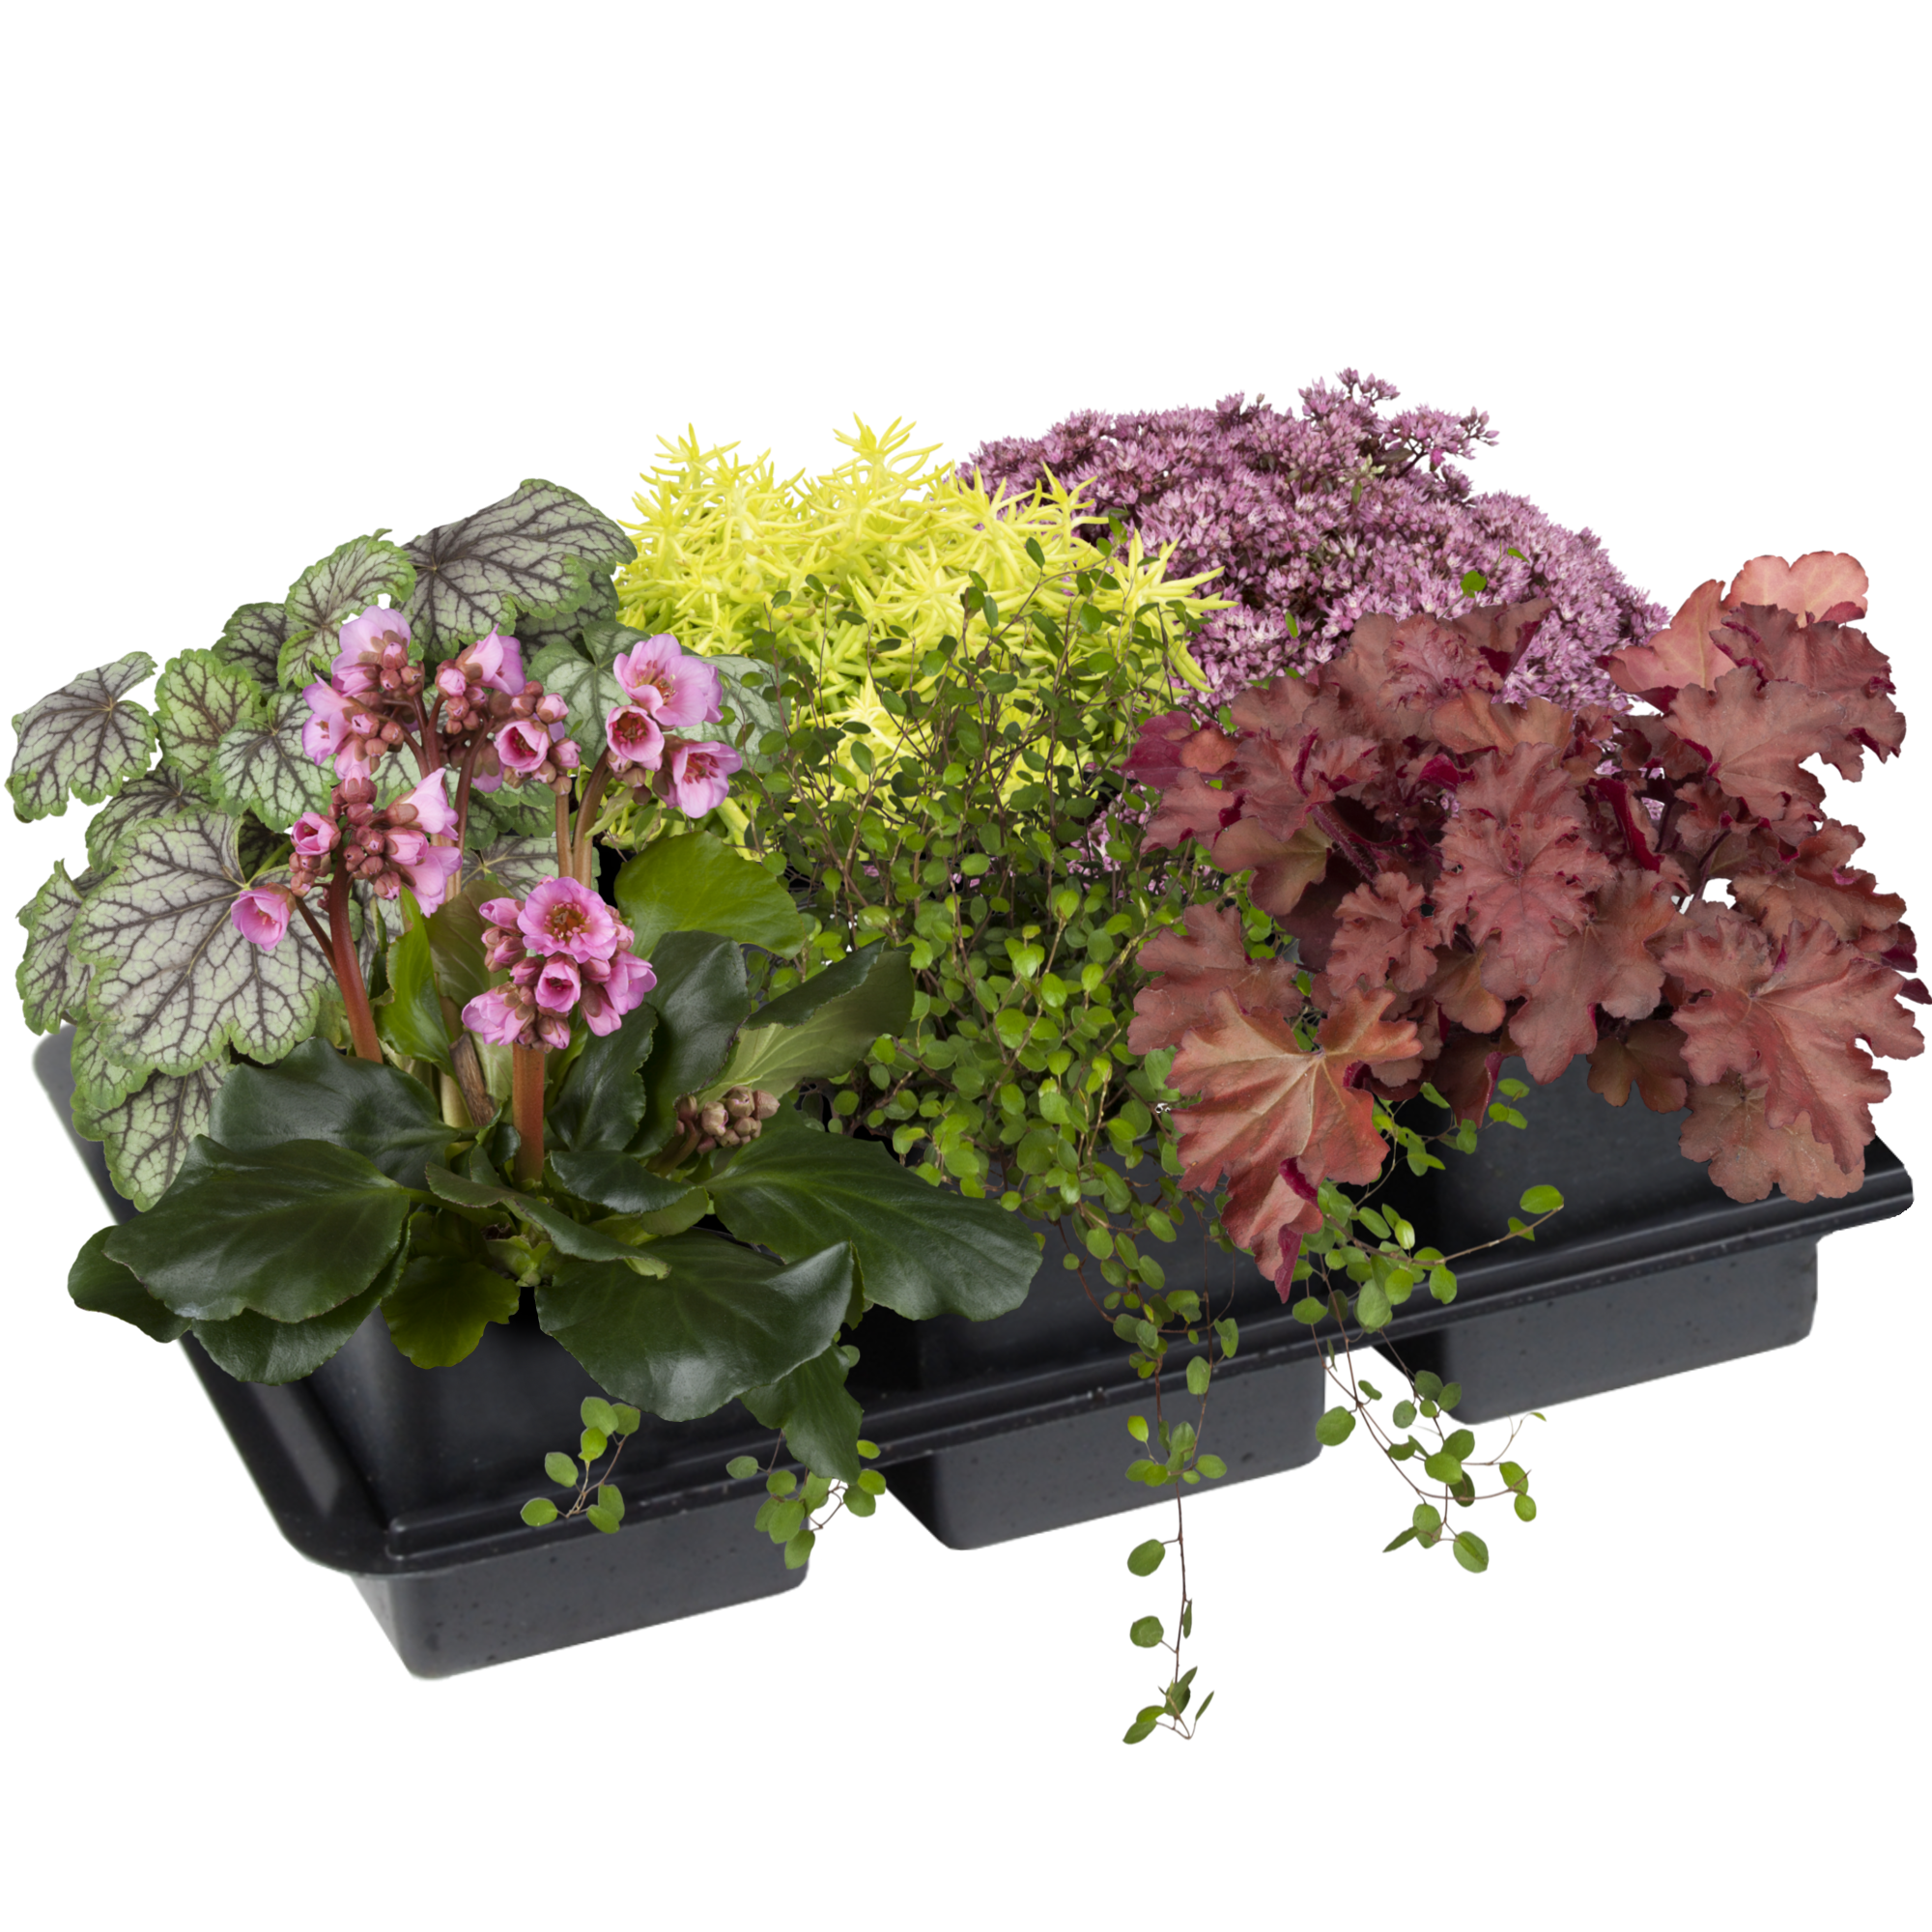 Herbstpflanzen-Mix 'Purfleur' 6er-Tray + product picture